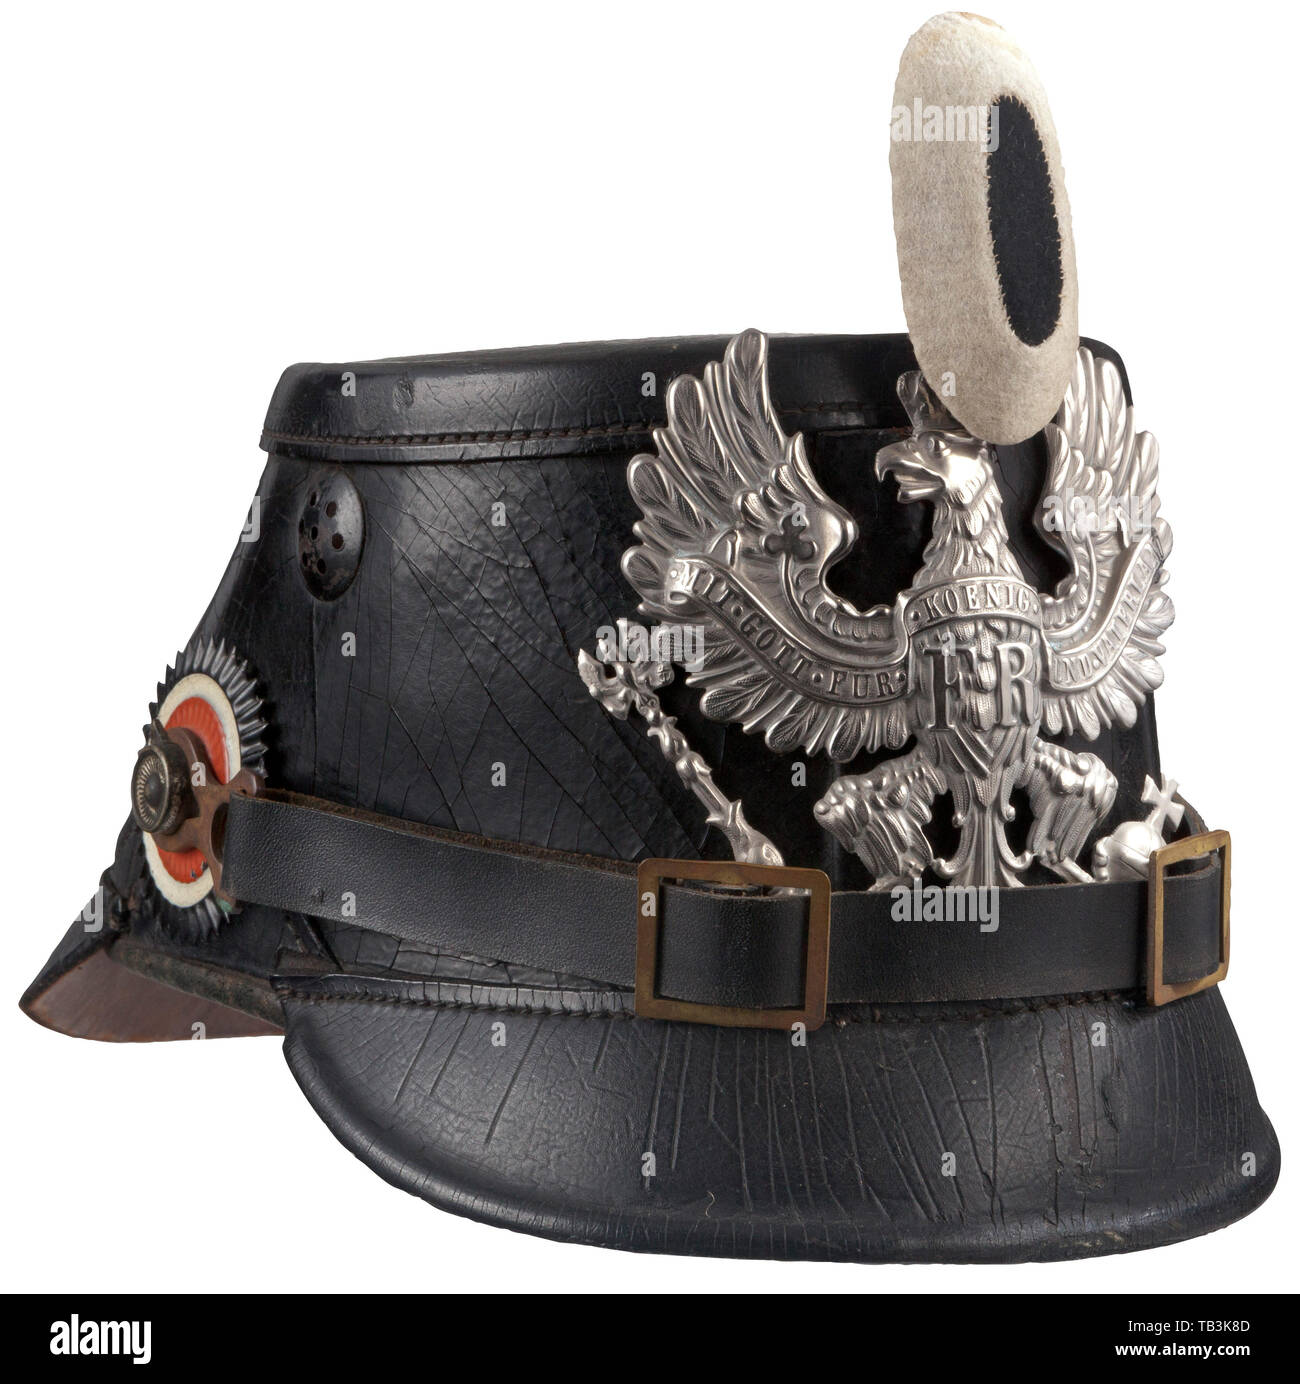 A pre-war shako for enlisted men of the Prussian Telegraph Battalion, Black leather body with front and rear visors showing some crazing, high detail silver Prussian eagle front plate attached by two loops with leather inserts, replacement leather chinstrap with brass buckles attached by M 91 lug side posts, EM national and Prussian state colour cockades, replica black and white Prussian field badge. Interior paper name and manufacturer's tag, 'Gefreiter R. Thomos', 'Festung-Fernsprech Co. No. 3, METZ', black leather liner. USA-lot. Prussian, Pru, Additional-Rights-Clearance-Info-Not-Available Stock Photo